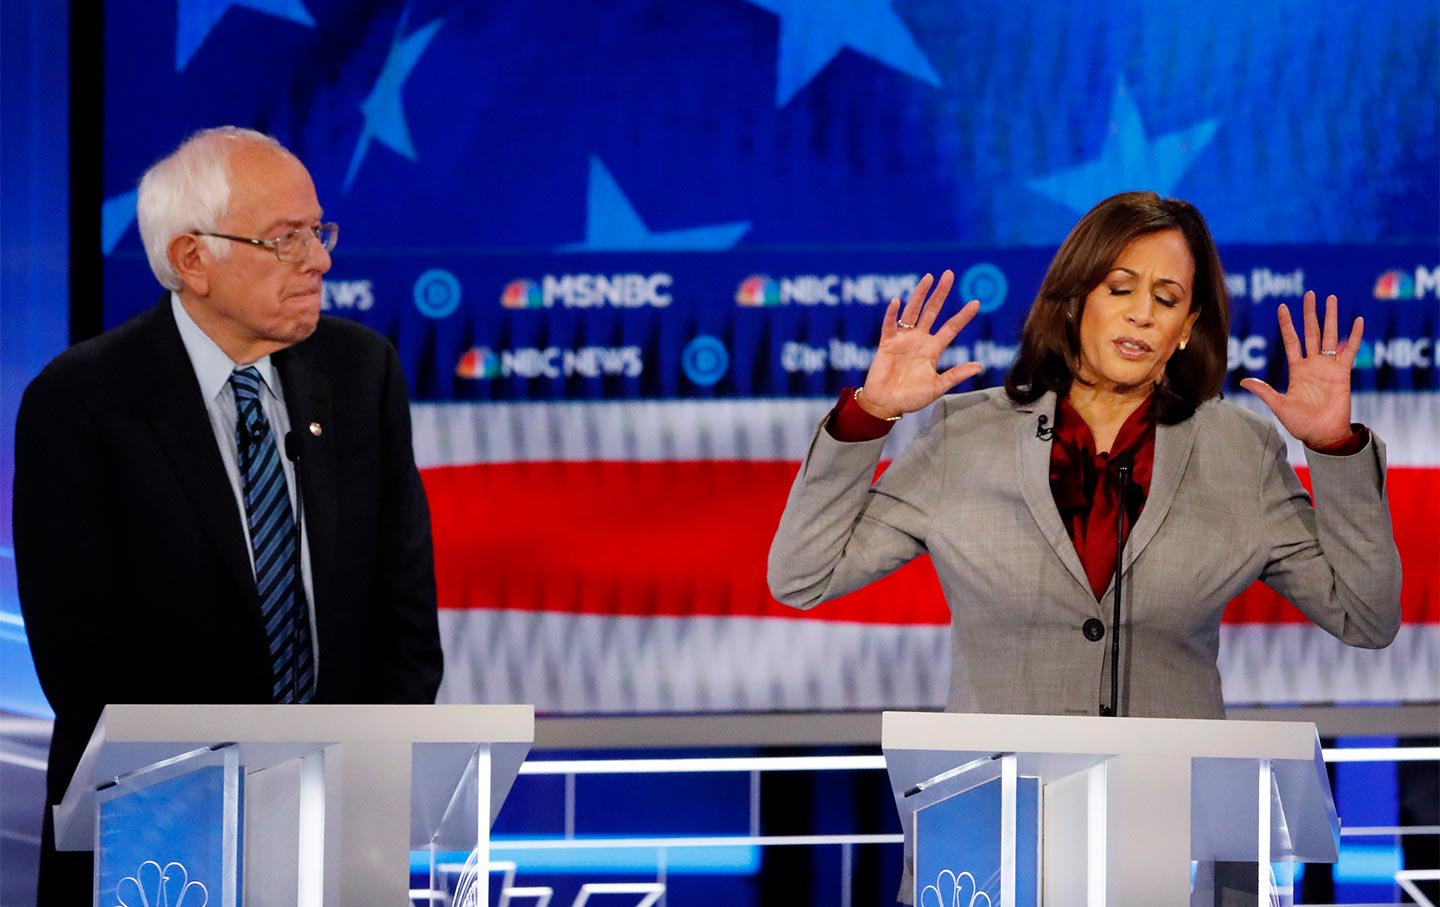 If Debate Skills Mattered, Kamala Harris Wouldn’t Be the One Dropping Out